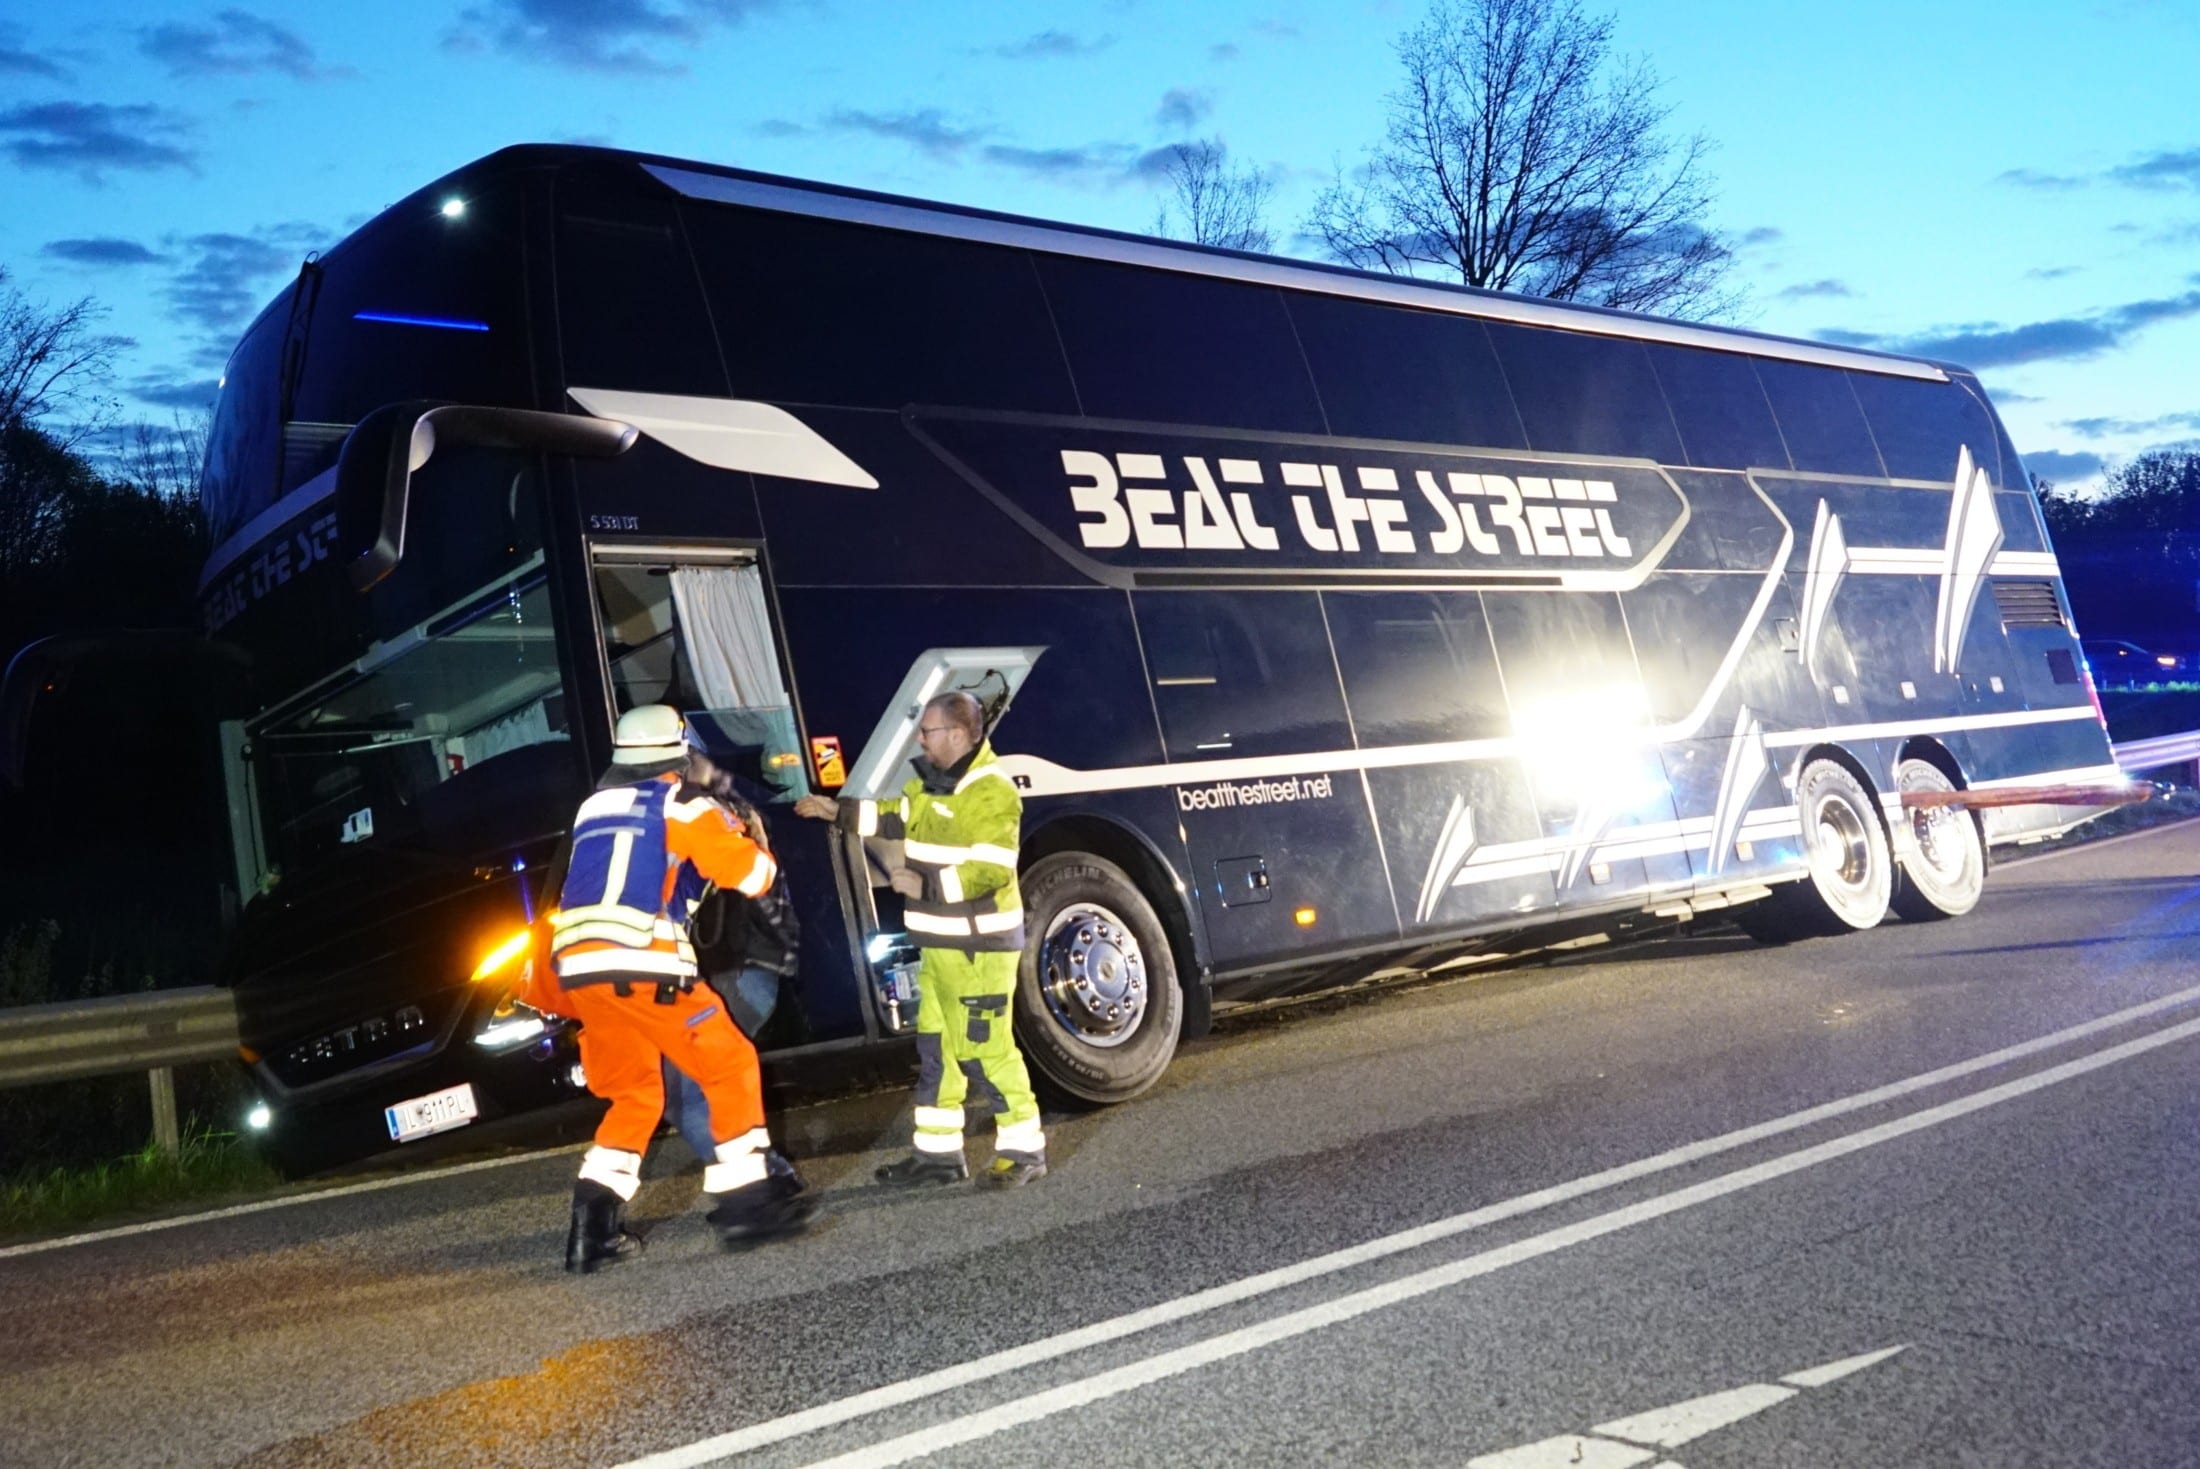 The singer's tour bus is said to have overturned on the A24. (Bild: NIBOR / Action Press / picturedesk.com)